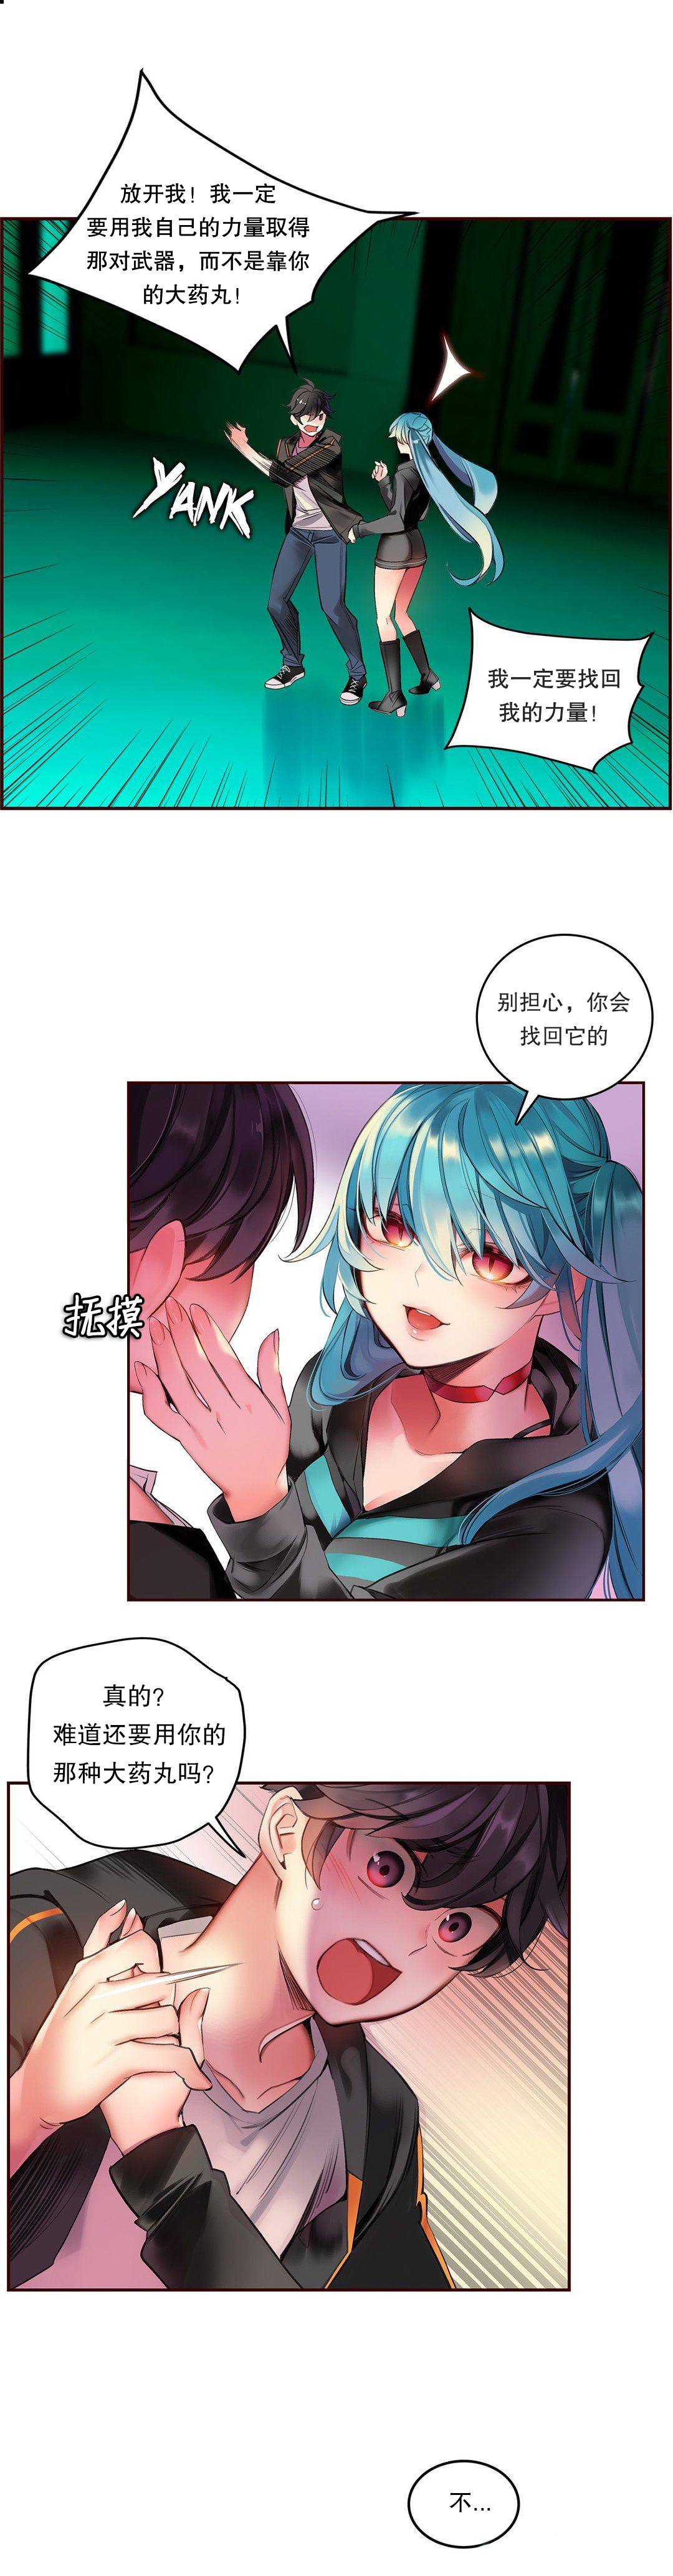 [Juder] Lilith`s Cord (第二季) Ch.61-68 [Chinese] [aaatwist个人汉化] [Ongoing] 